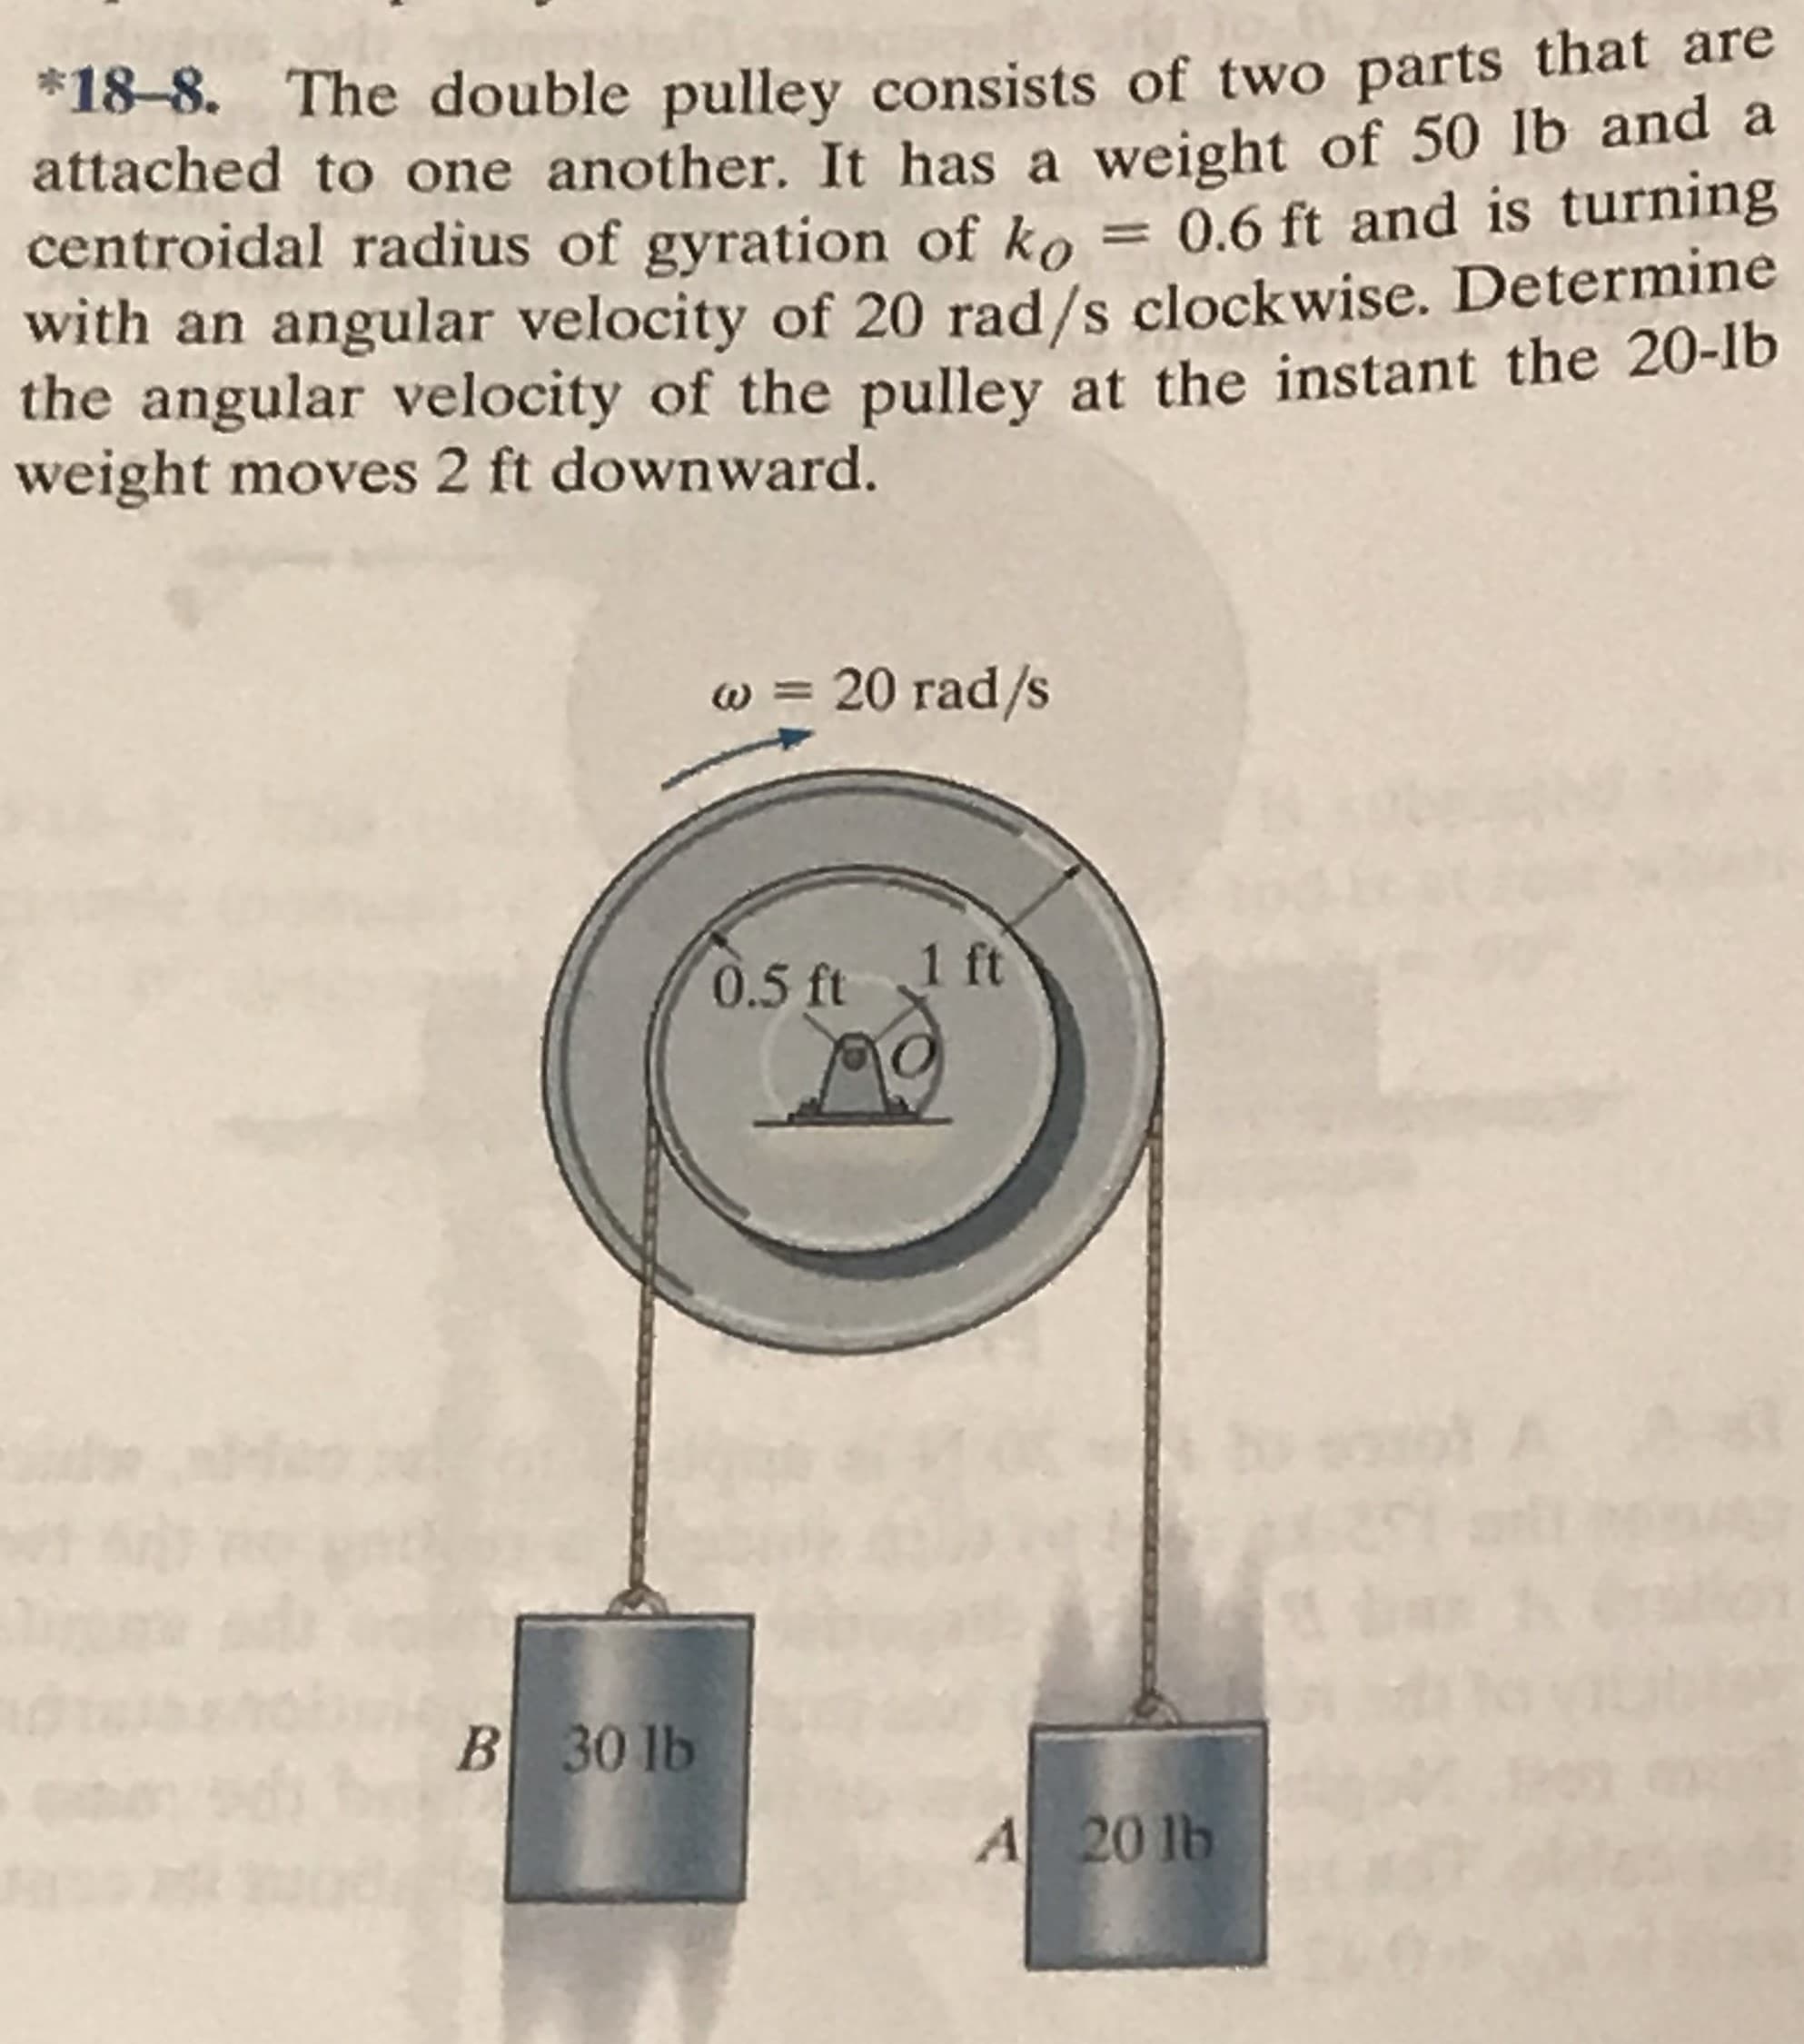 *18-8. The double pulley consists of two parts that are
attached to one another. It has a weight of 50 lb and a
centroidal radius of gyration of ko = 0.6 ft and is turning
with an angular velocity of 20 rad/s clockwise. Determine
the angular velocity of the pulley at the instant the 20-1b
weight moves 2 ft downward.
w = 20 rad/s
0.5 ft 1 ft
to sool A
B 30 lb
A 20 lb
